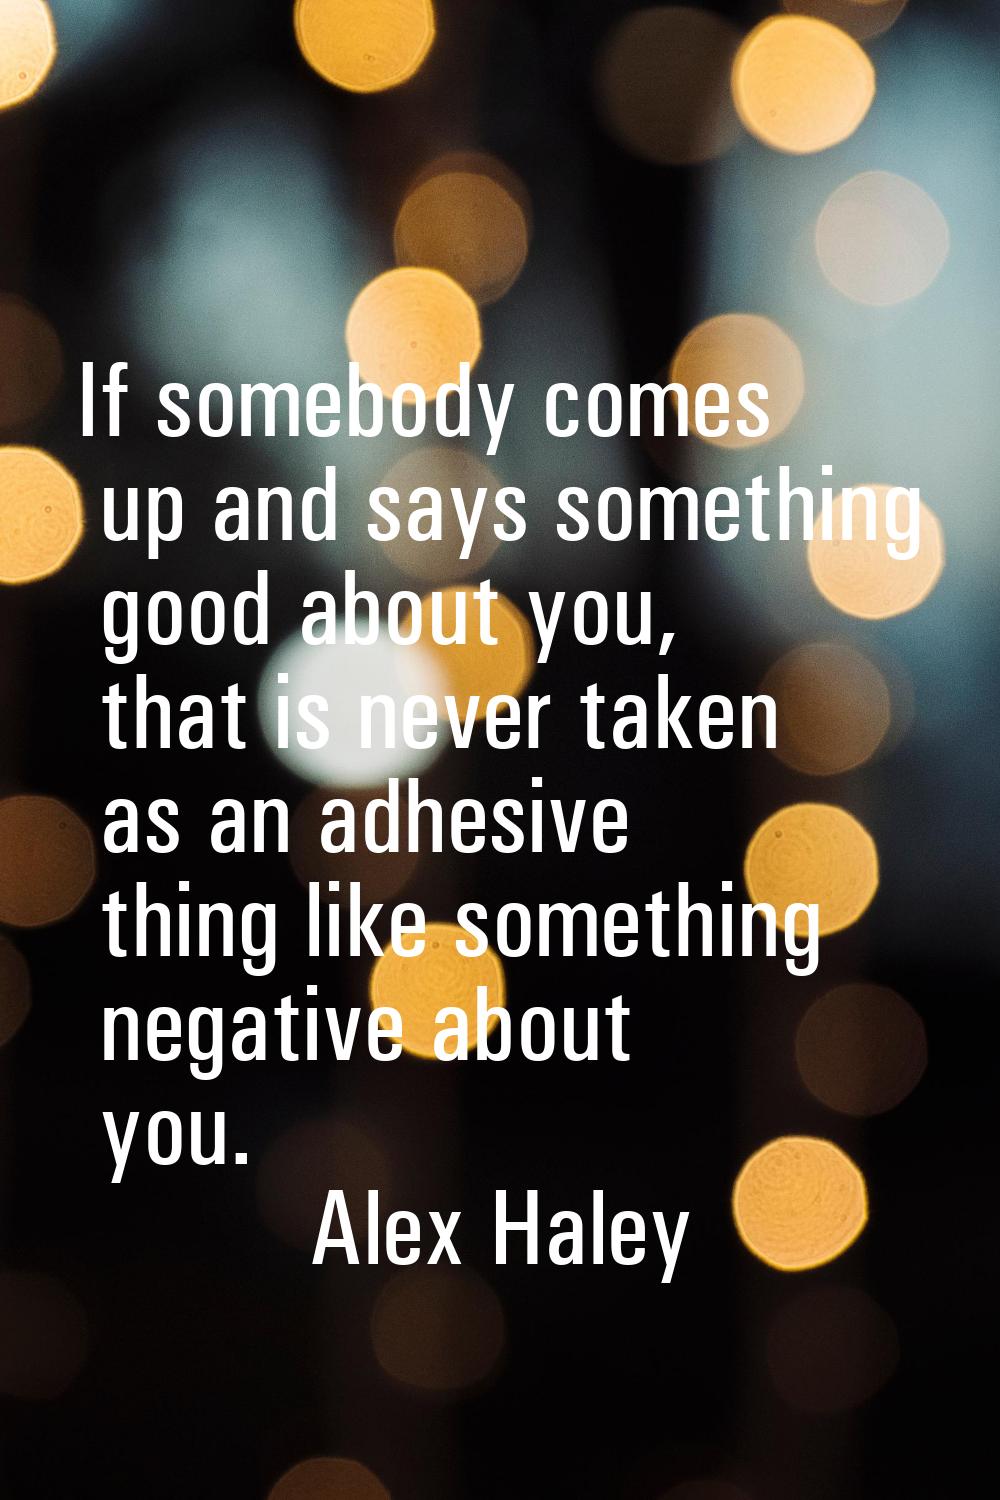 If somebody comes up and says something good about you, that is never taken as an adhesive thing li